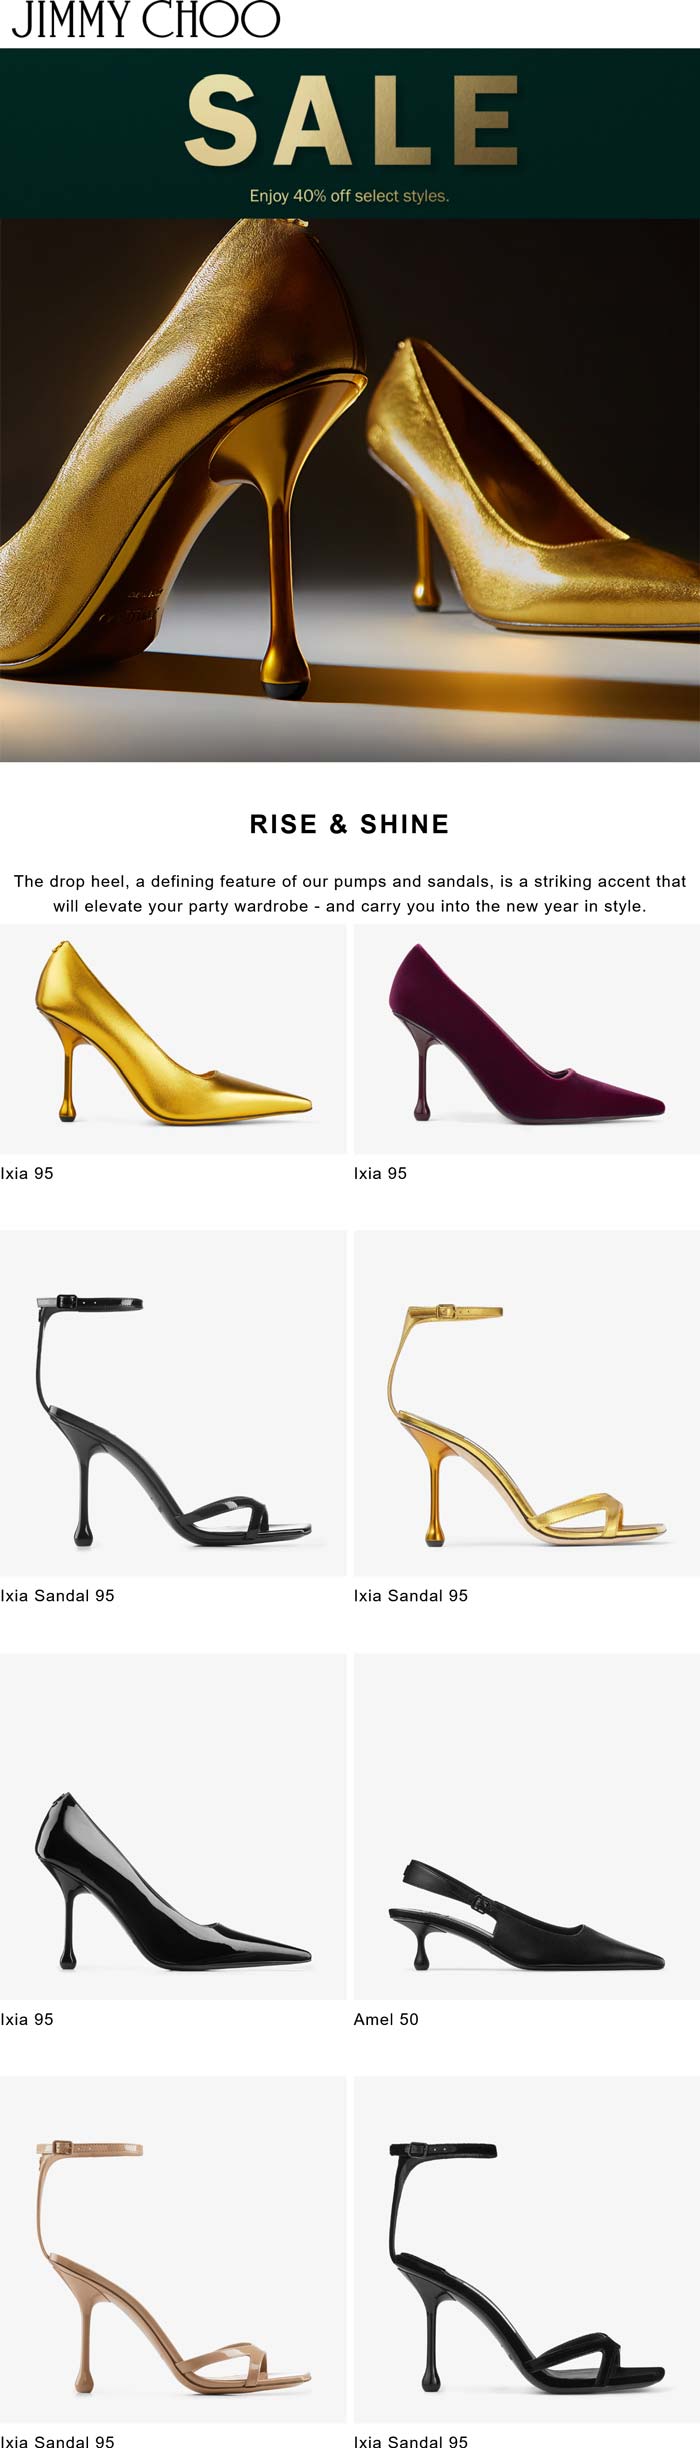 Jimmy Choo stores Coupon  40% off various styles at Jimmy Choo #jimmychoo 